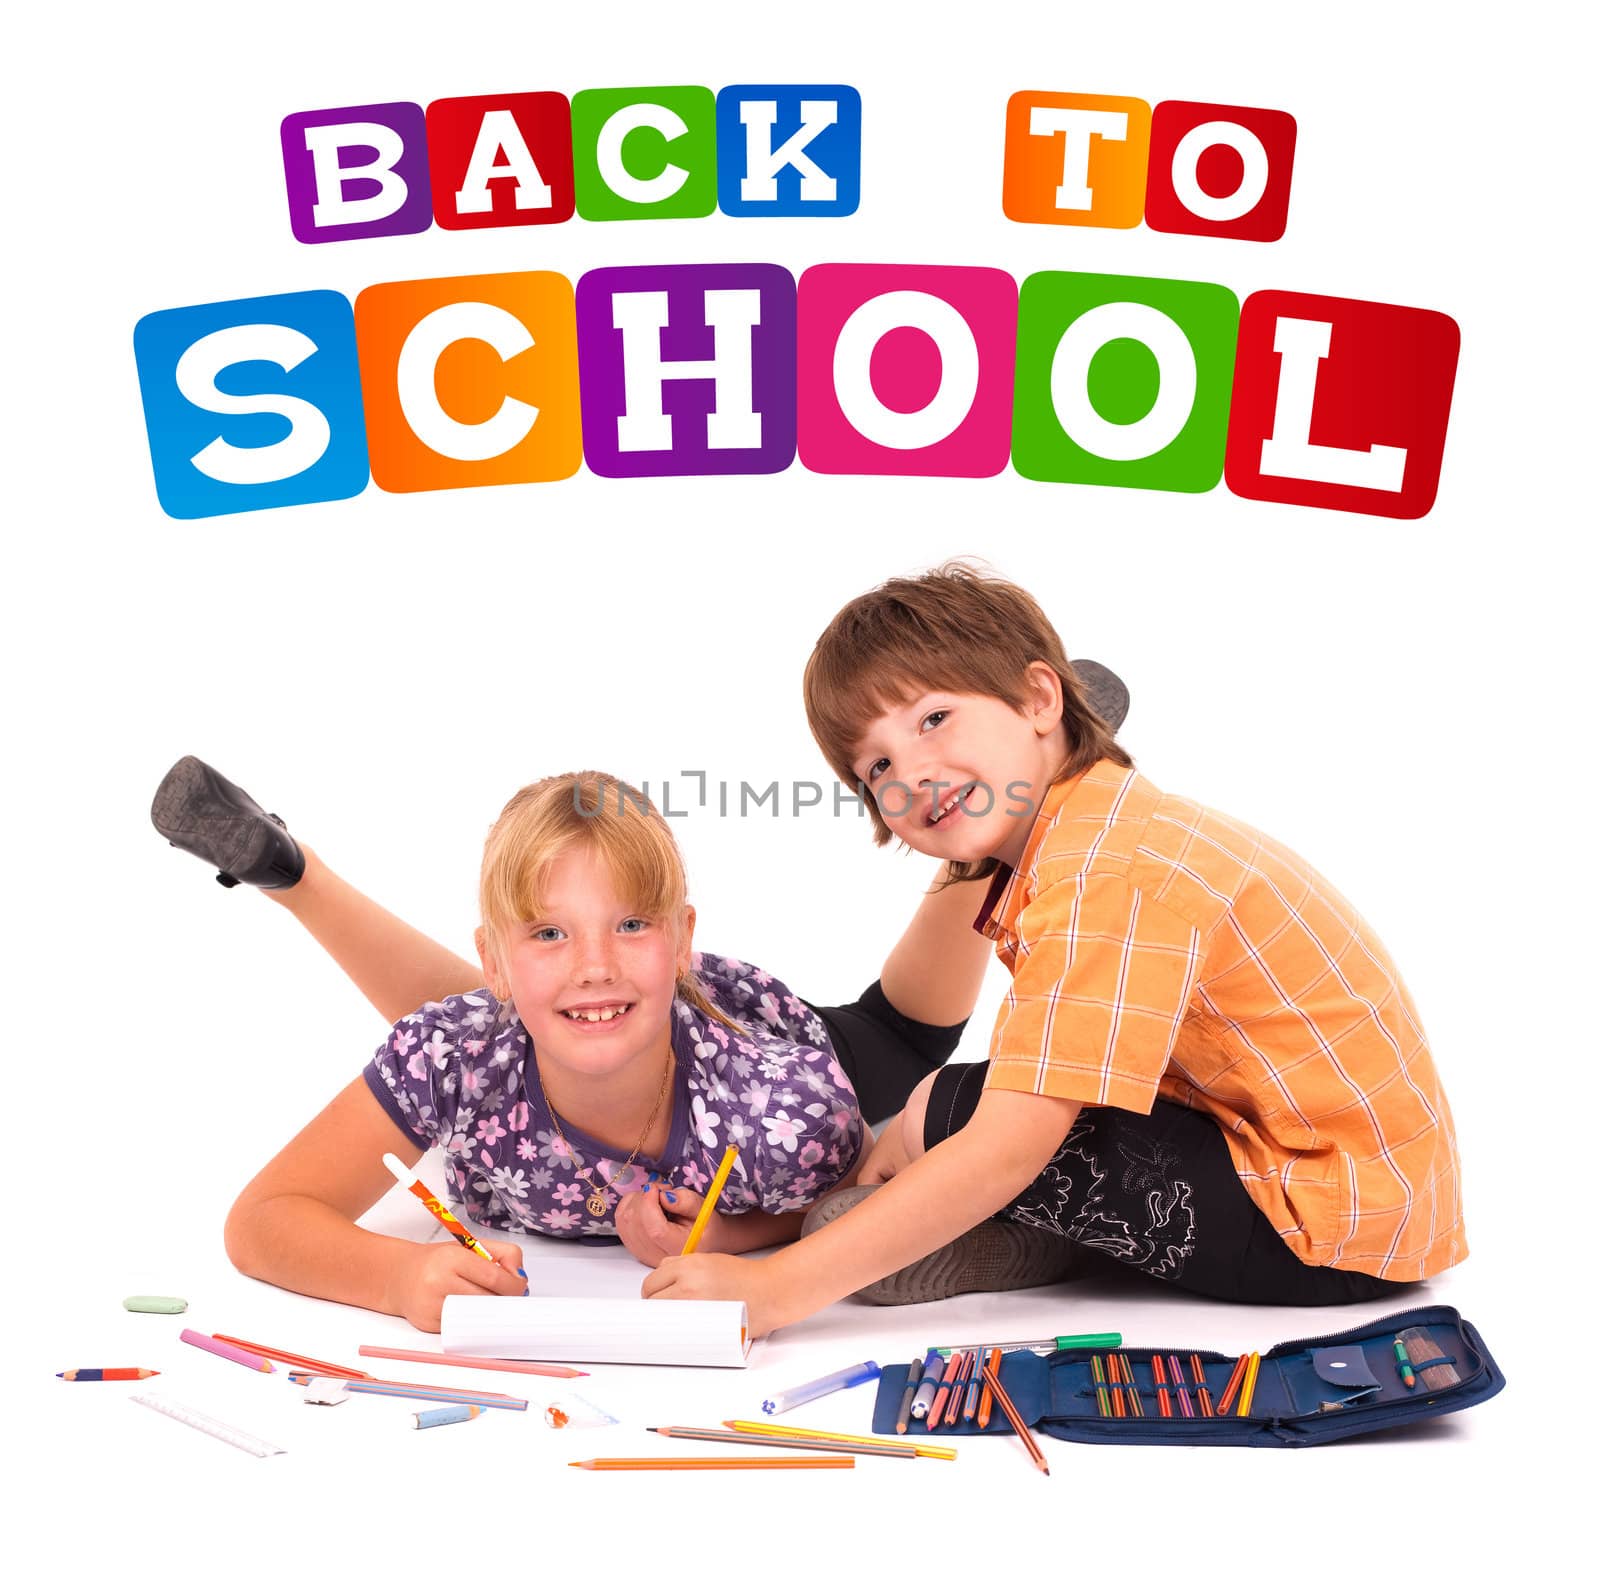 kids posing for back to school theme over white background 